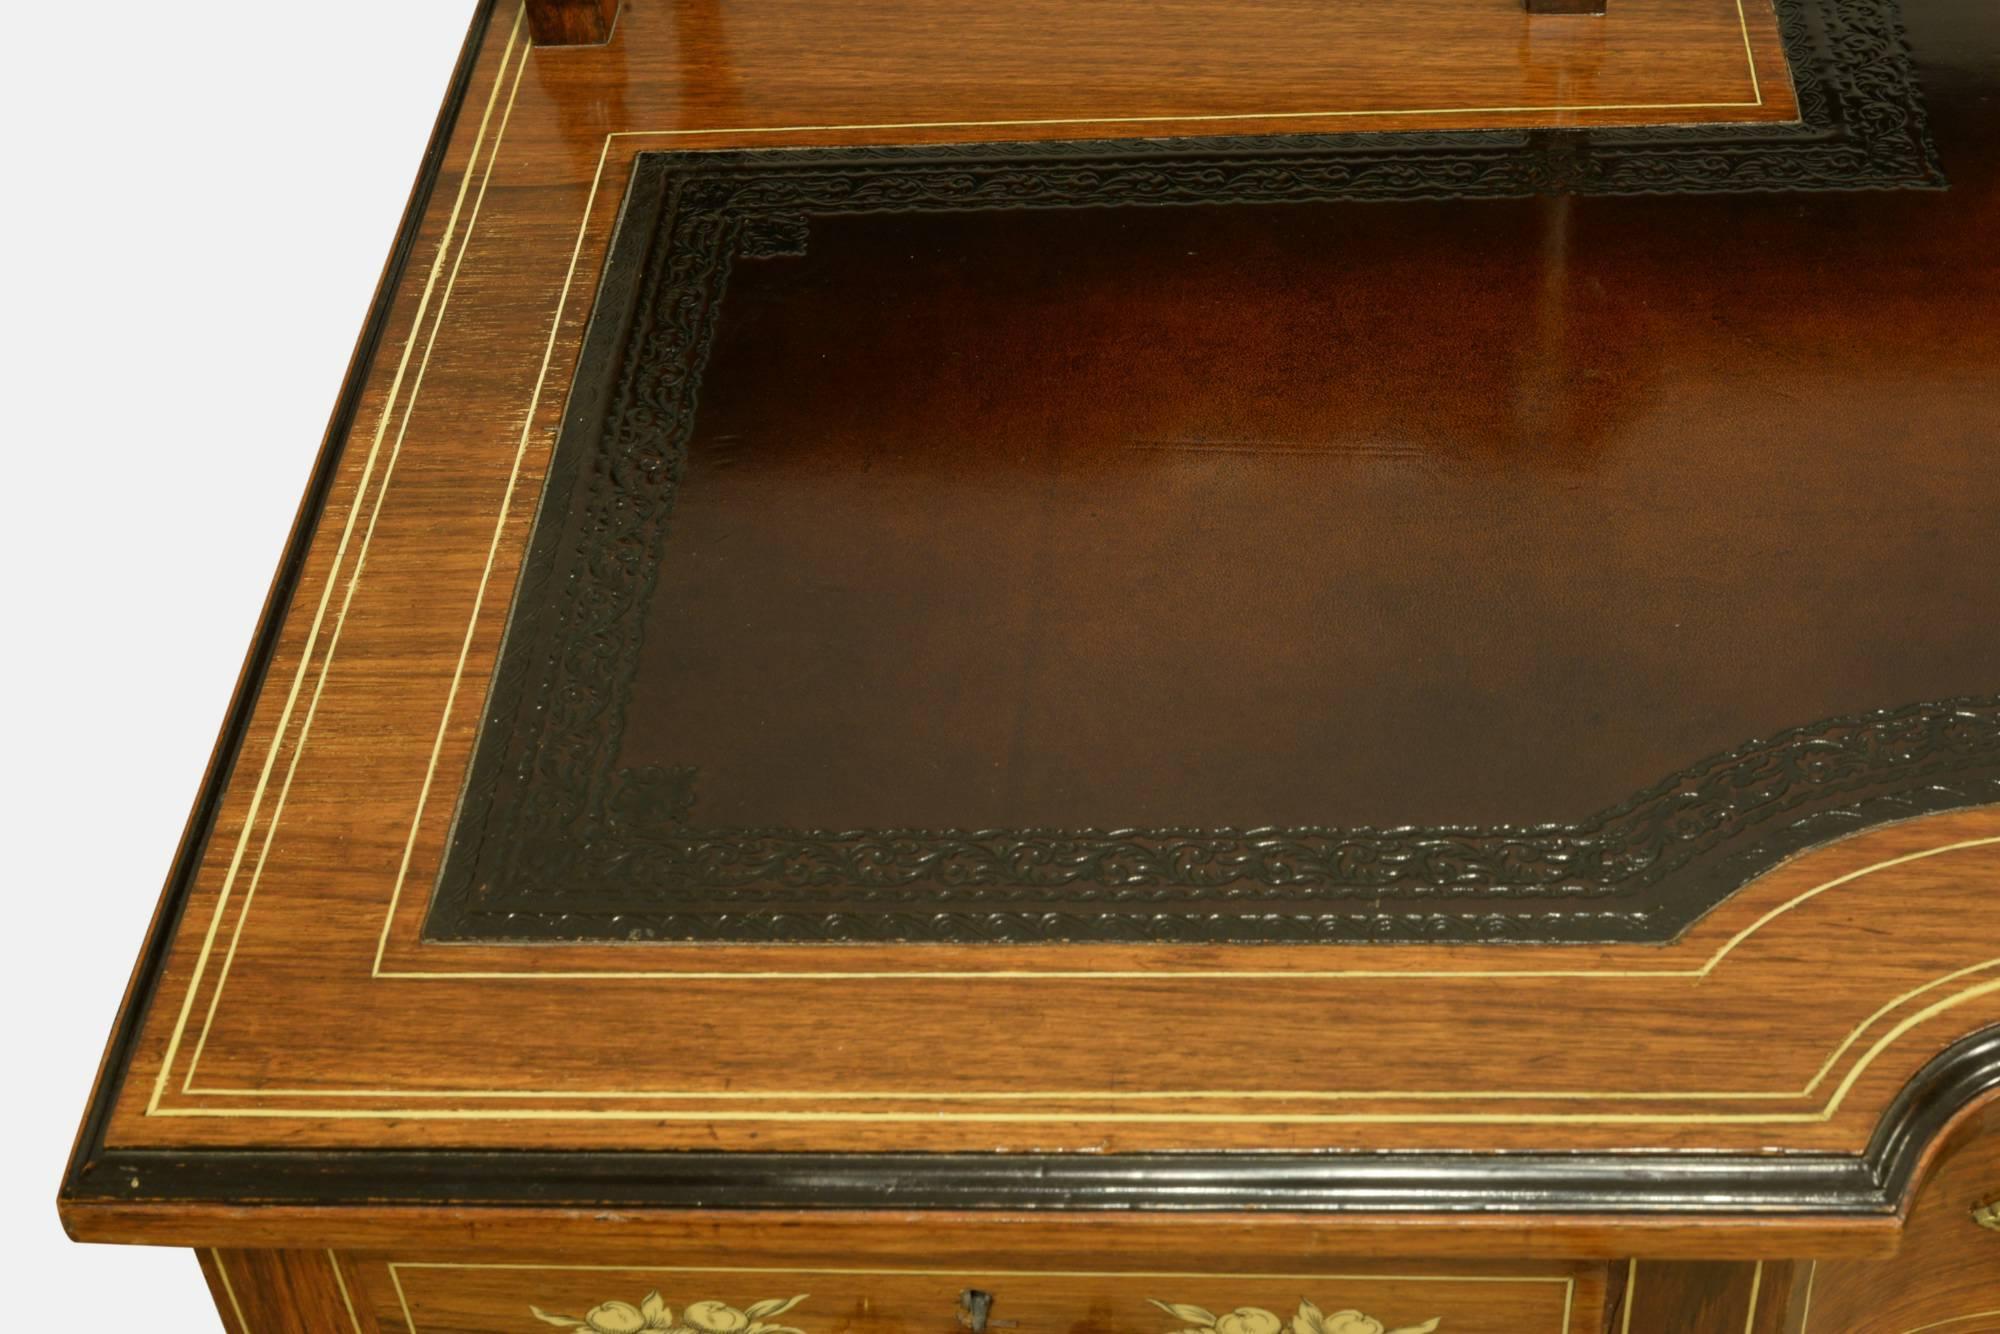 Edwardian Mahogany Inlaid Kneehole Desk In Excellent Condition For Sale In Salisbury, GB